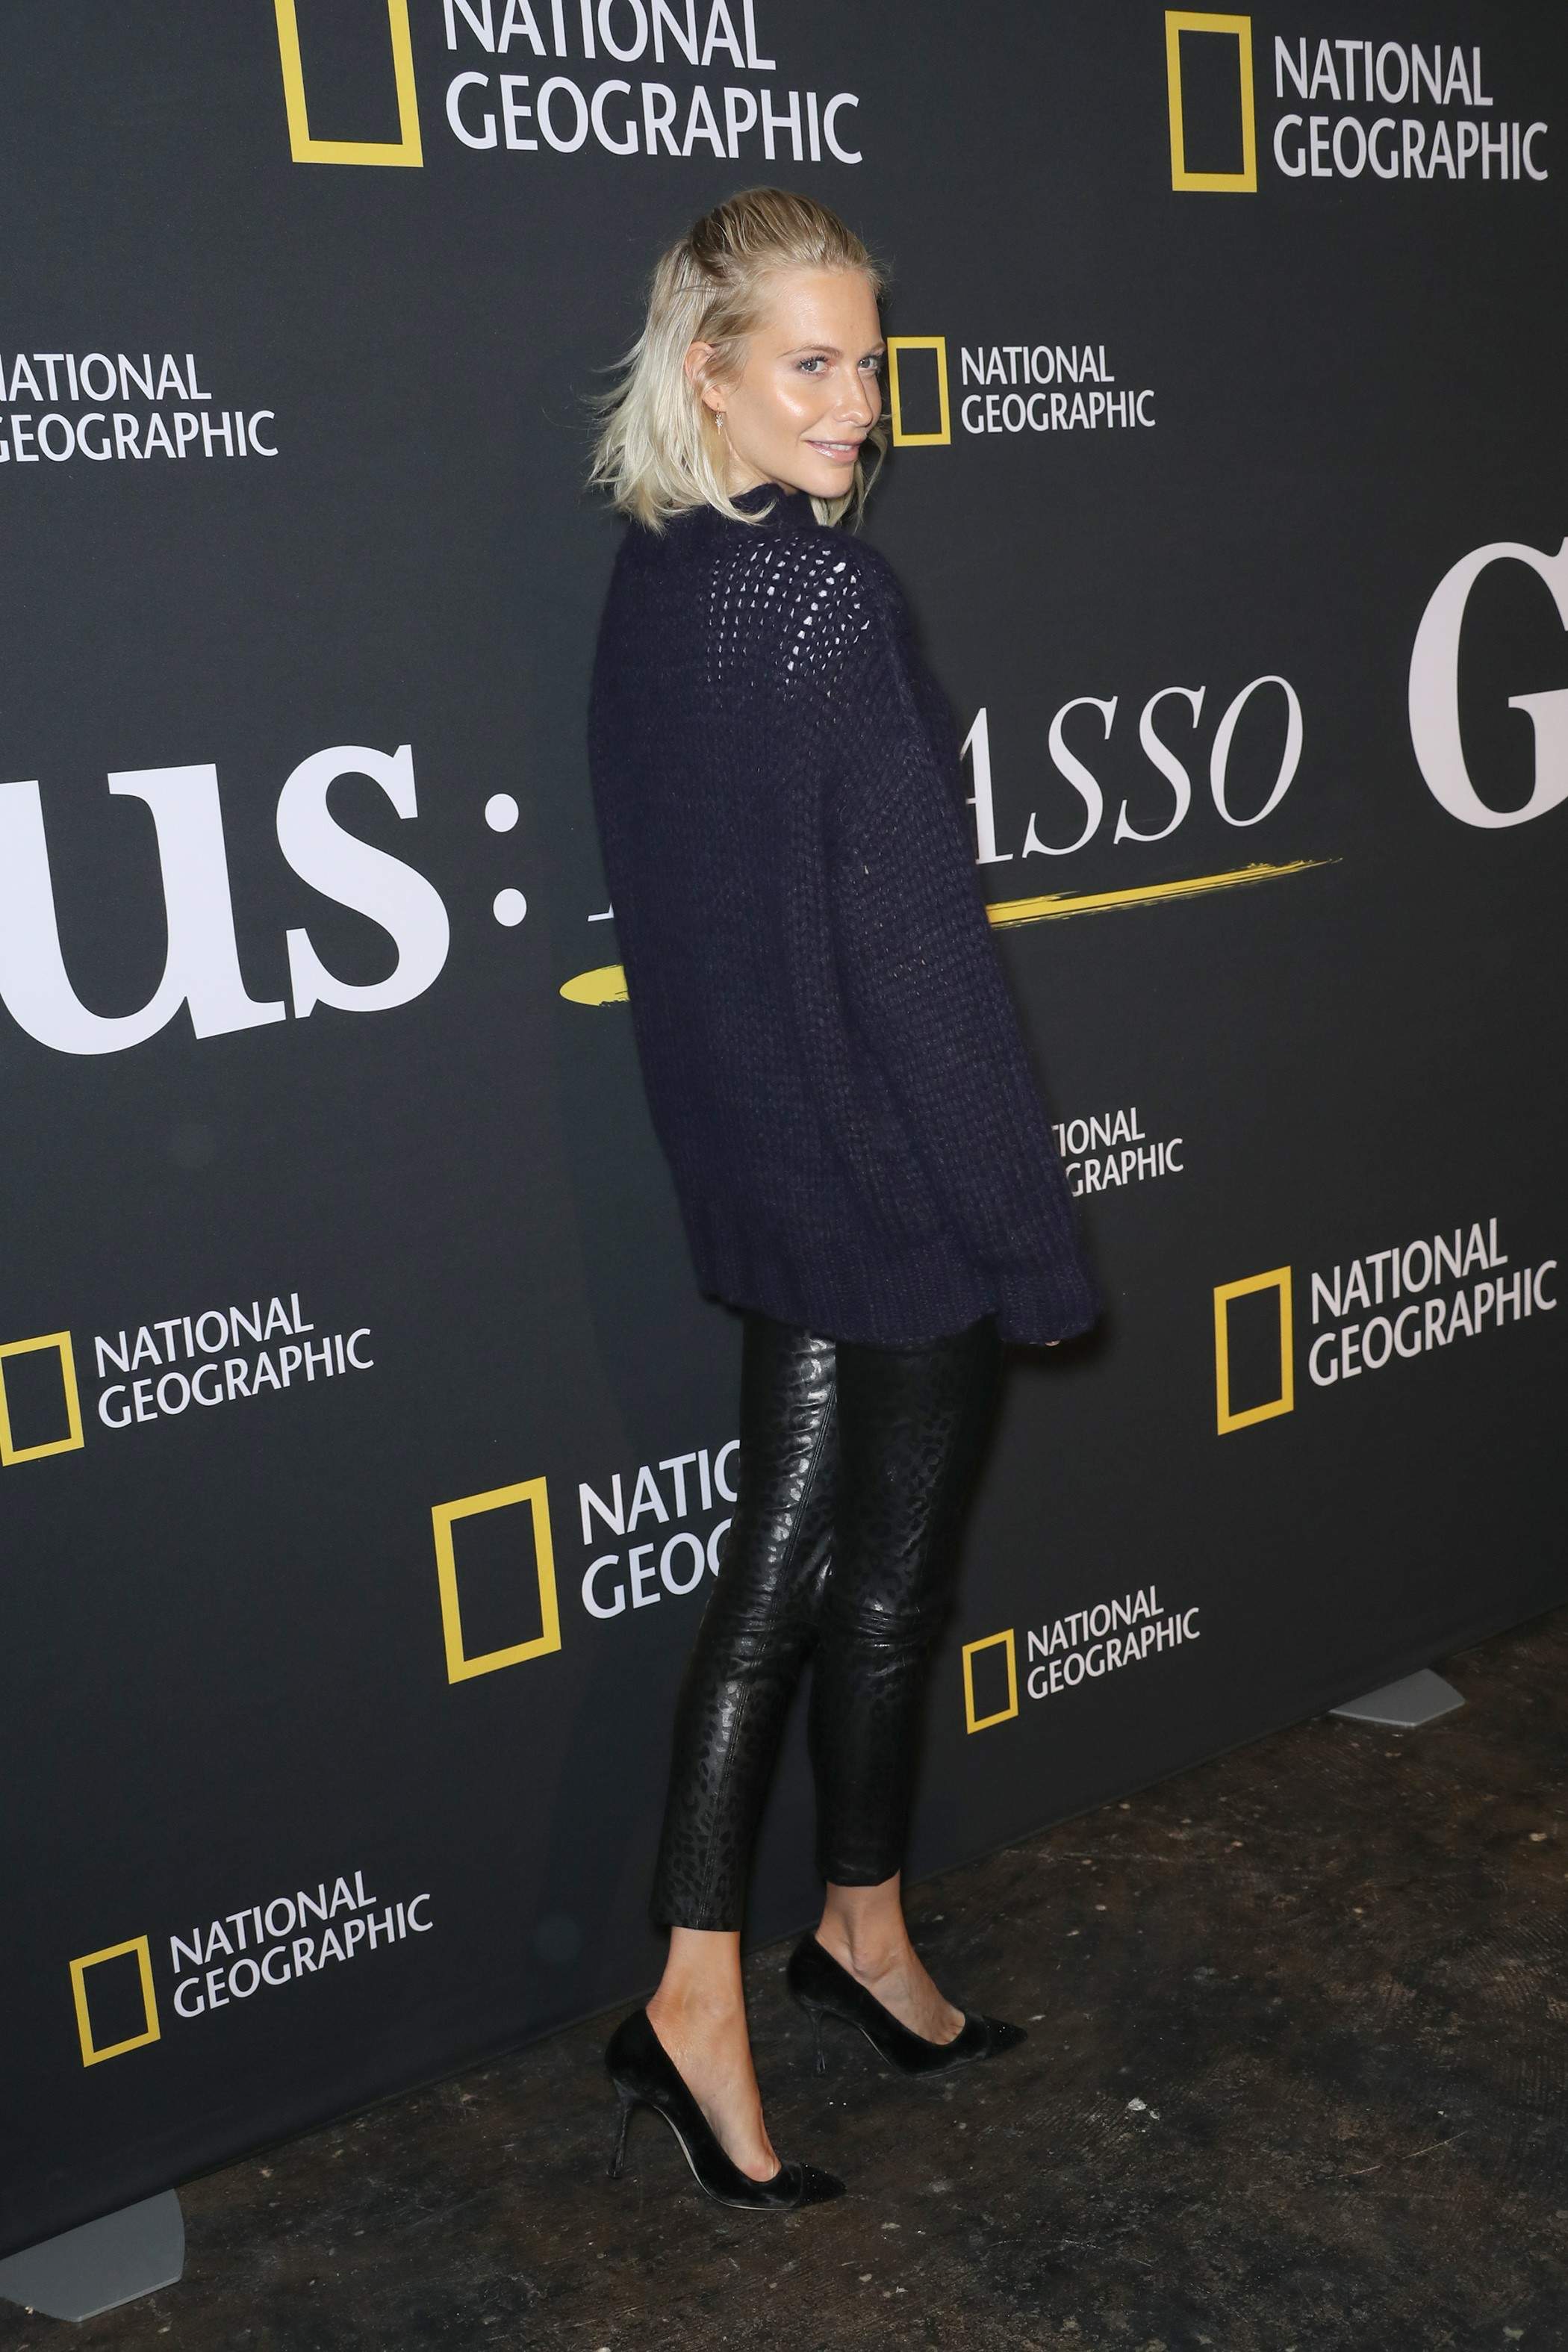 Poppy Delevingne attends Genius Picasso TV series photocall